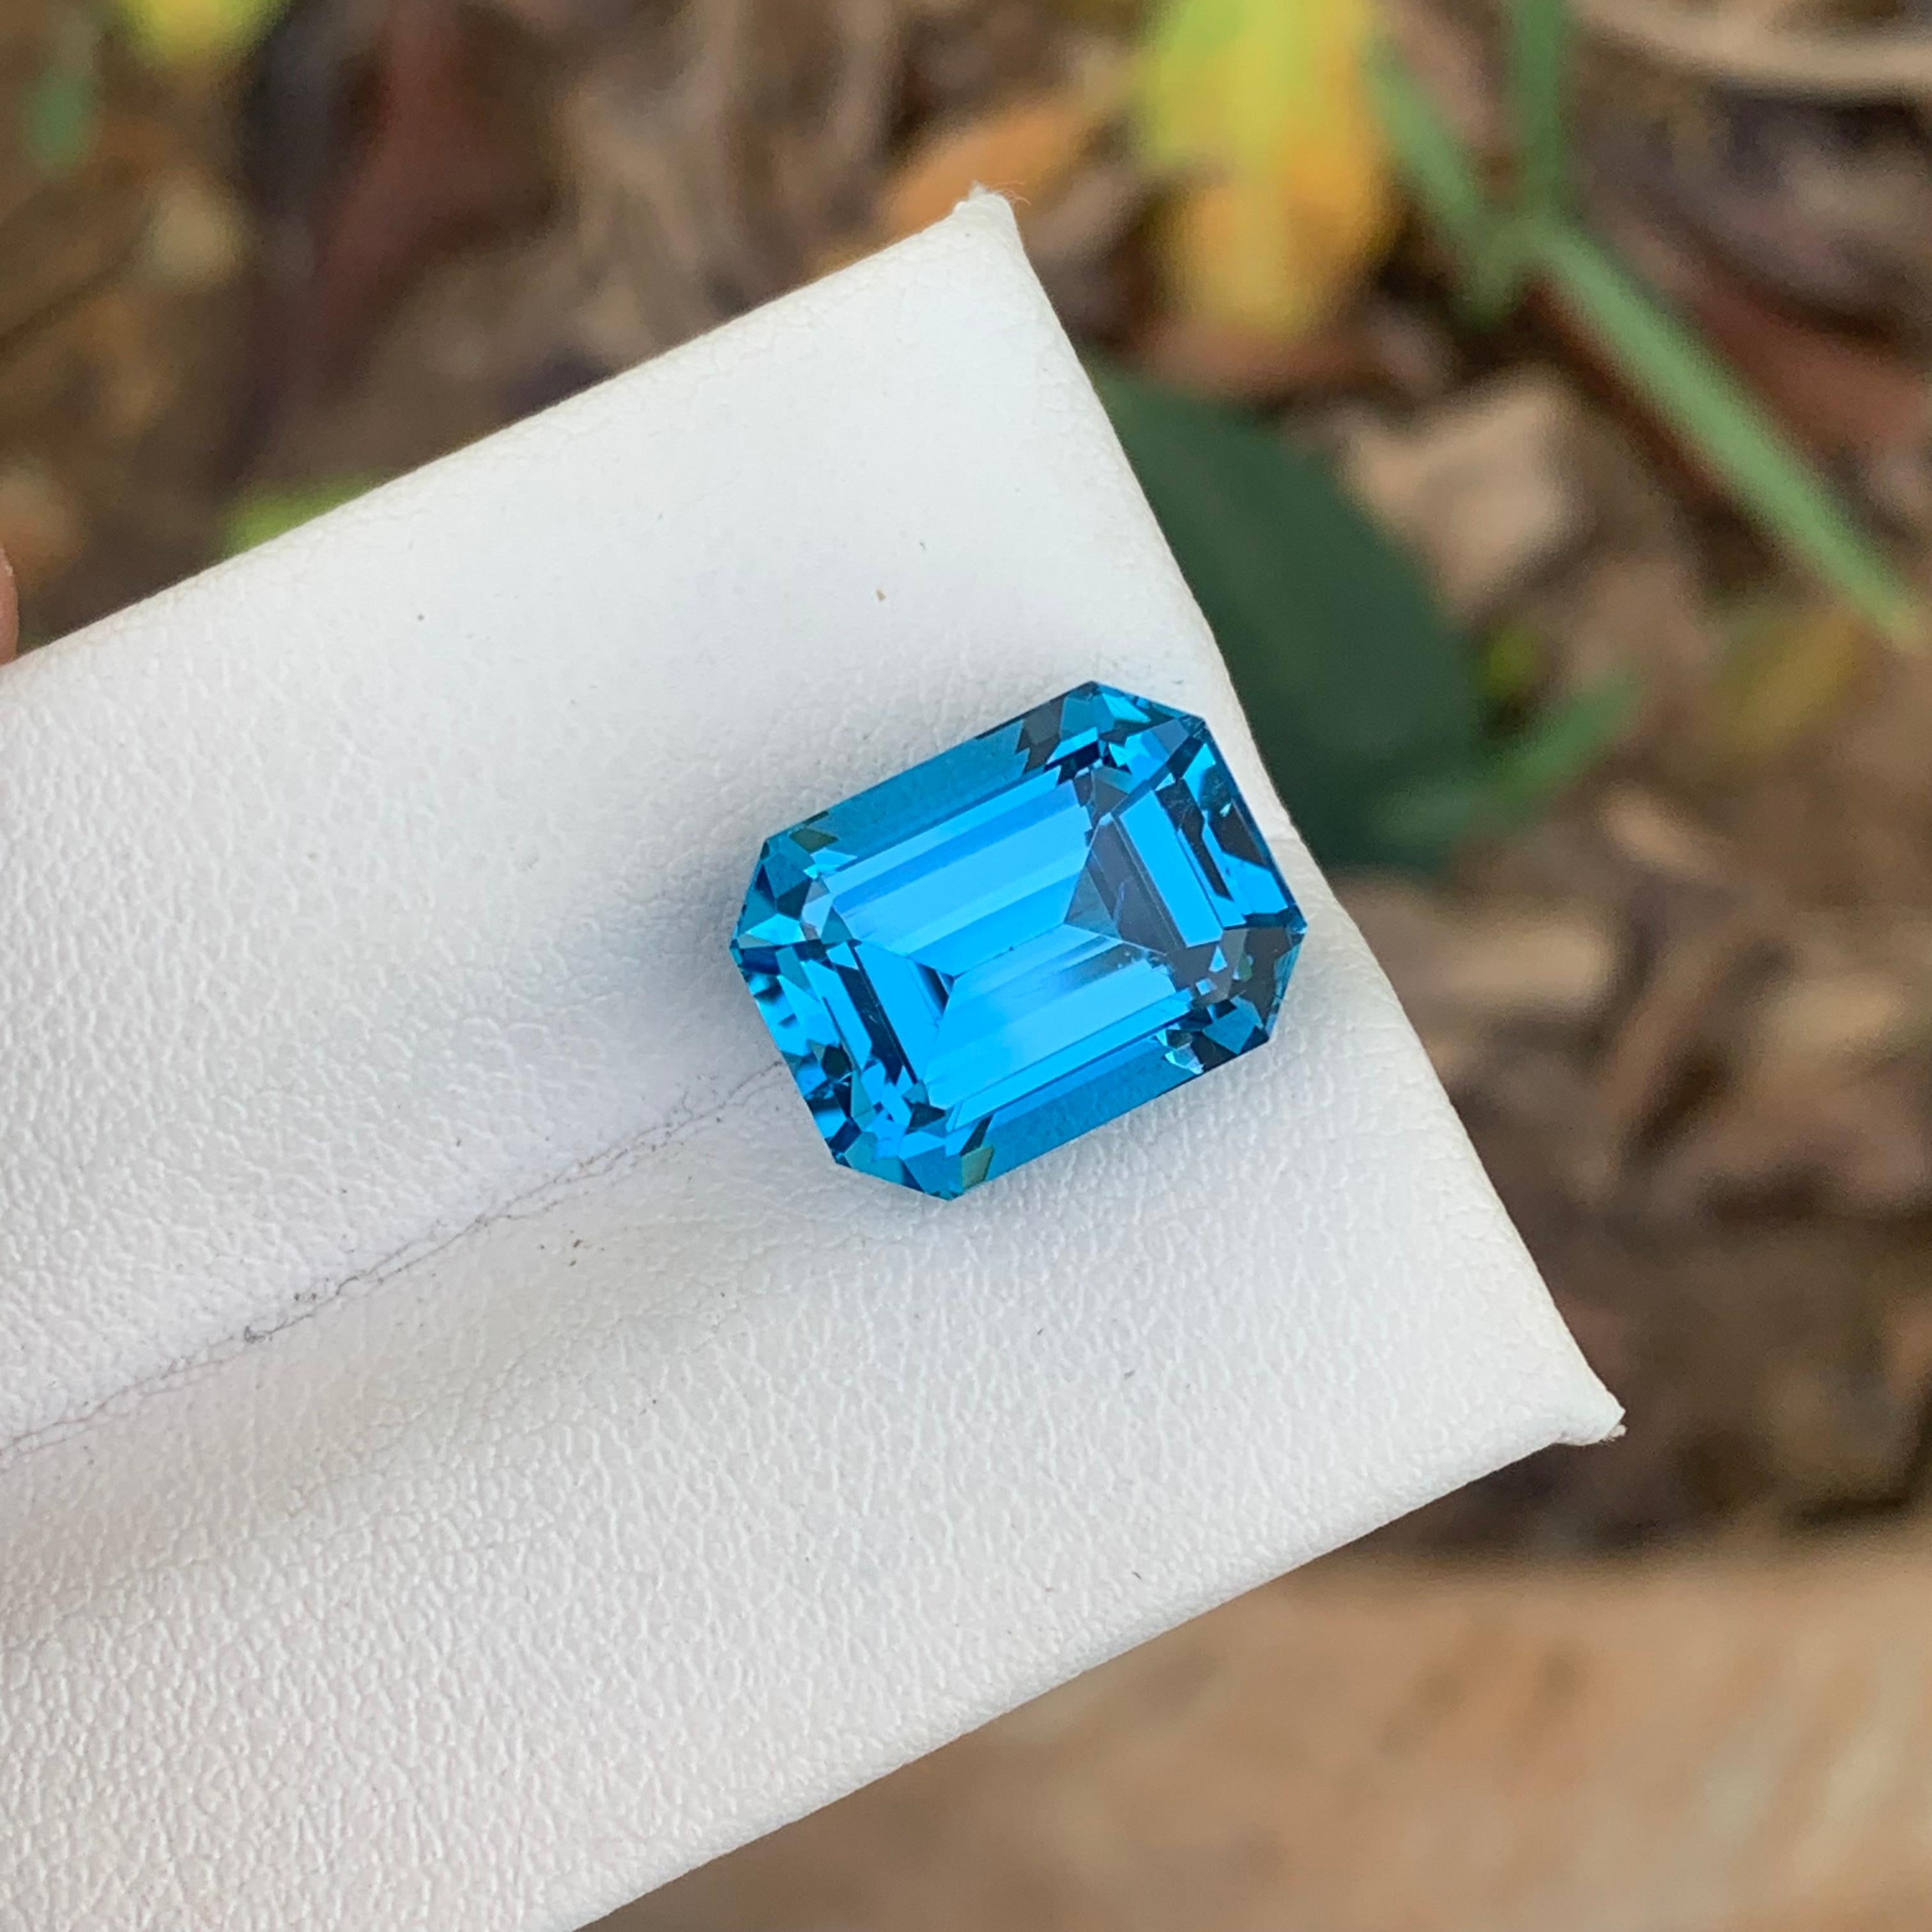 Aesthetic Movement Gorgeous Intense Blue Loose Electric Blue Topaz from Brazil 9.85 Carat Ring Gem For Sale